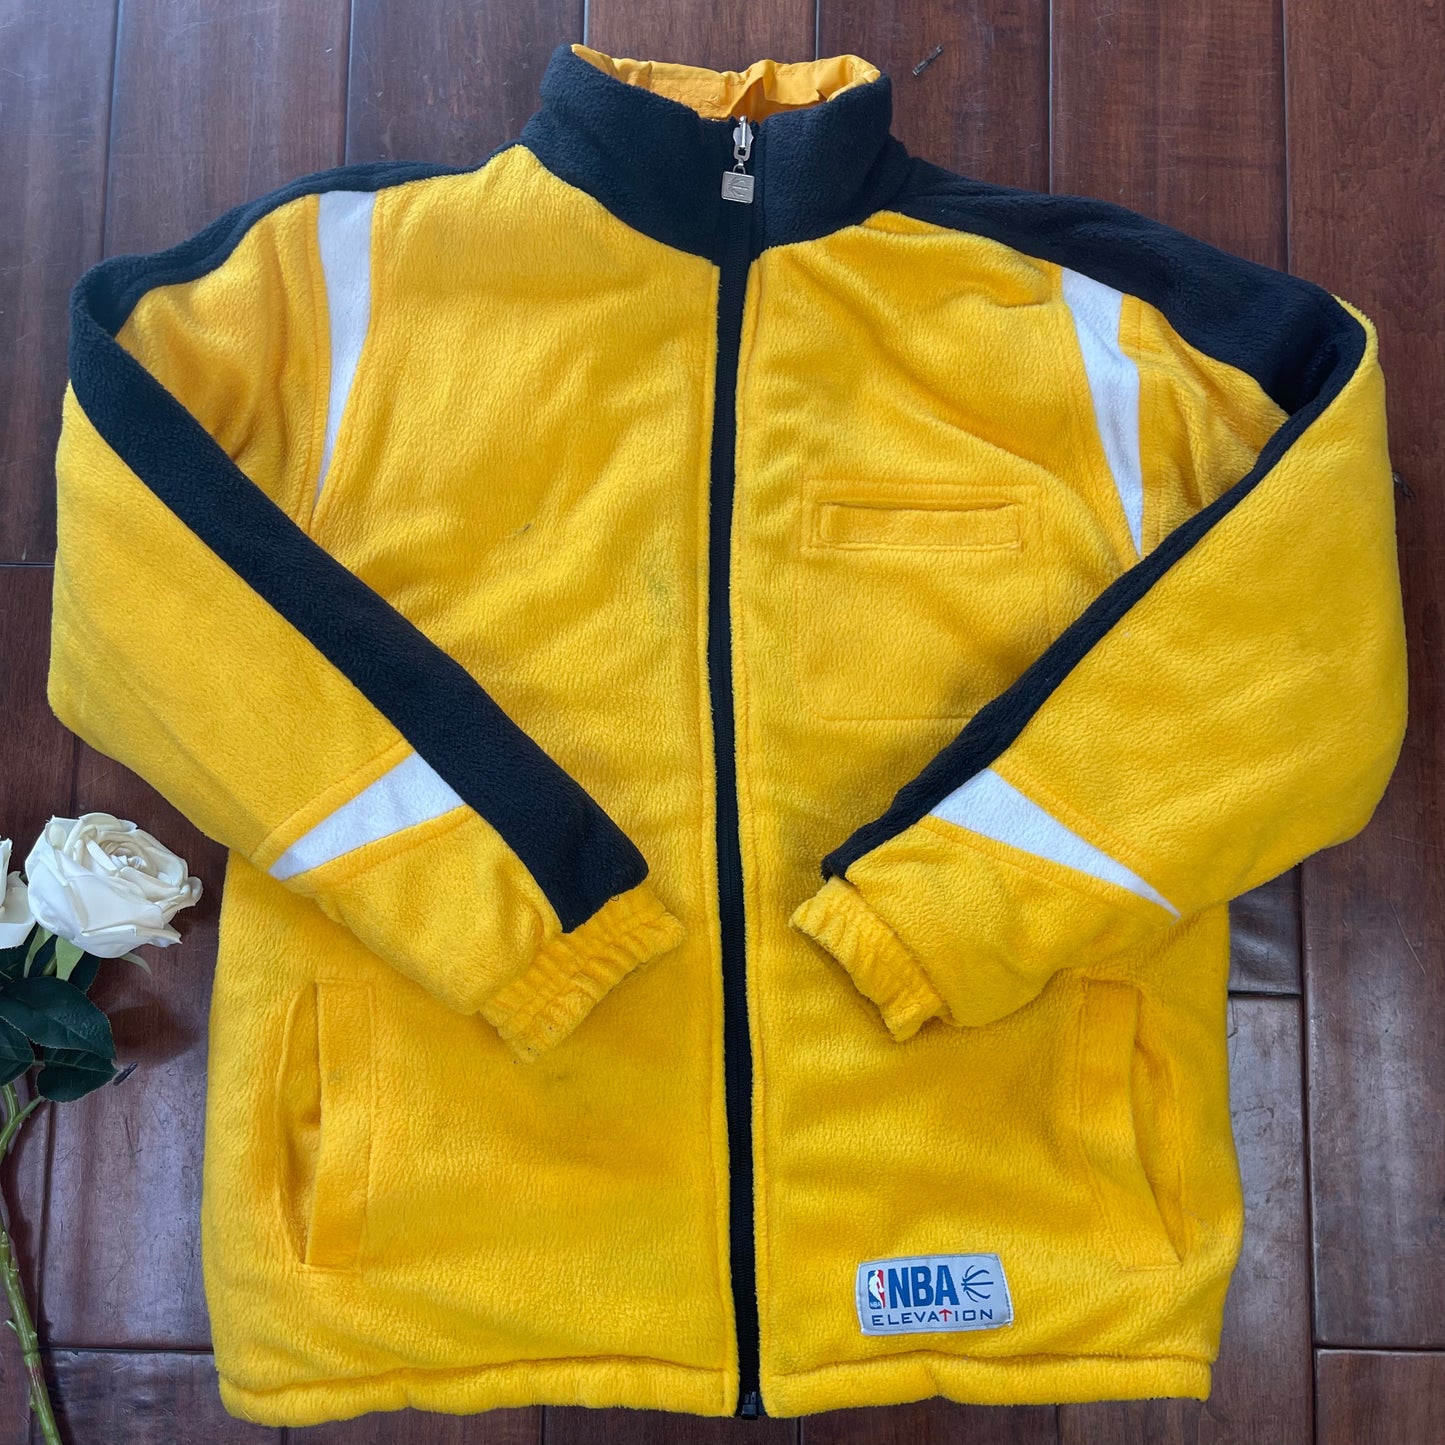 THRIFTED NBA LAKERS REVERSIBLE ZIP-UP JACKET